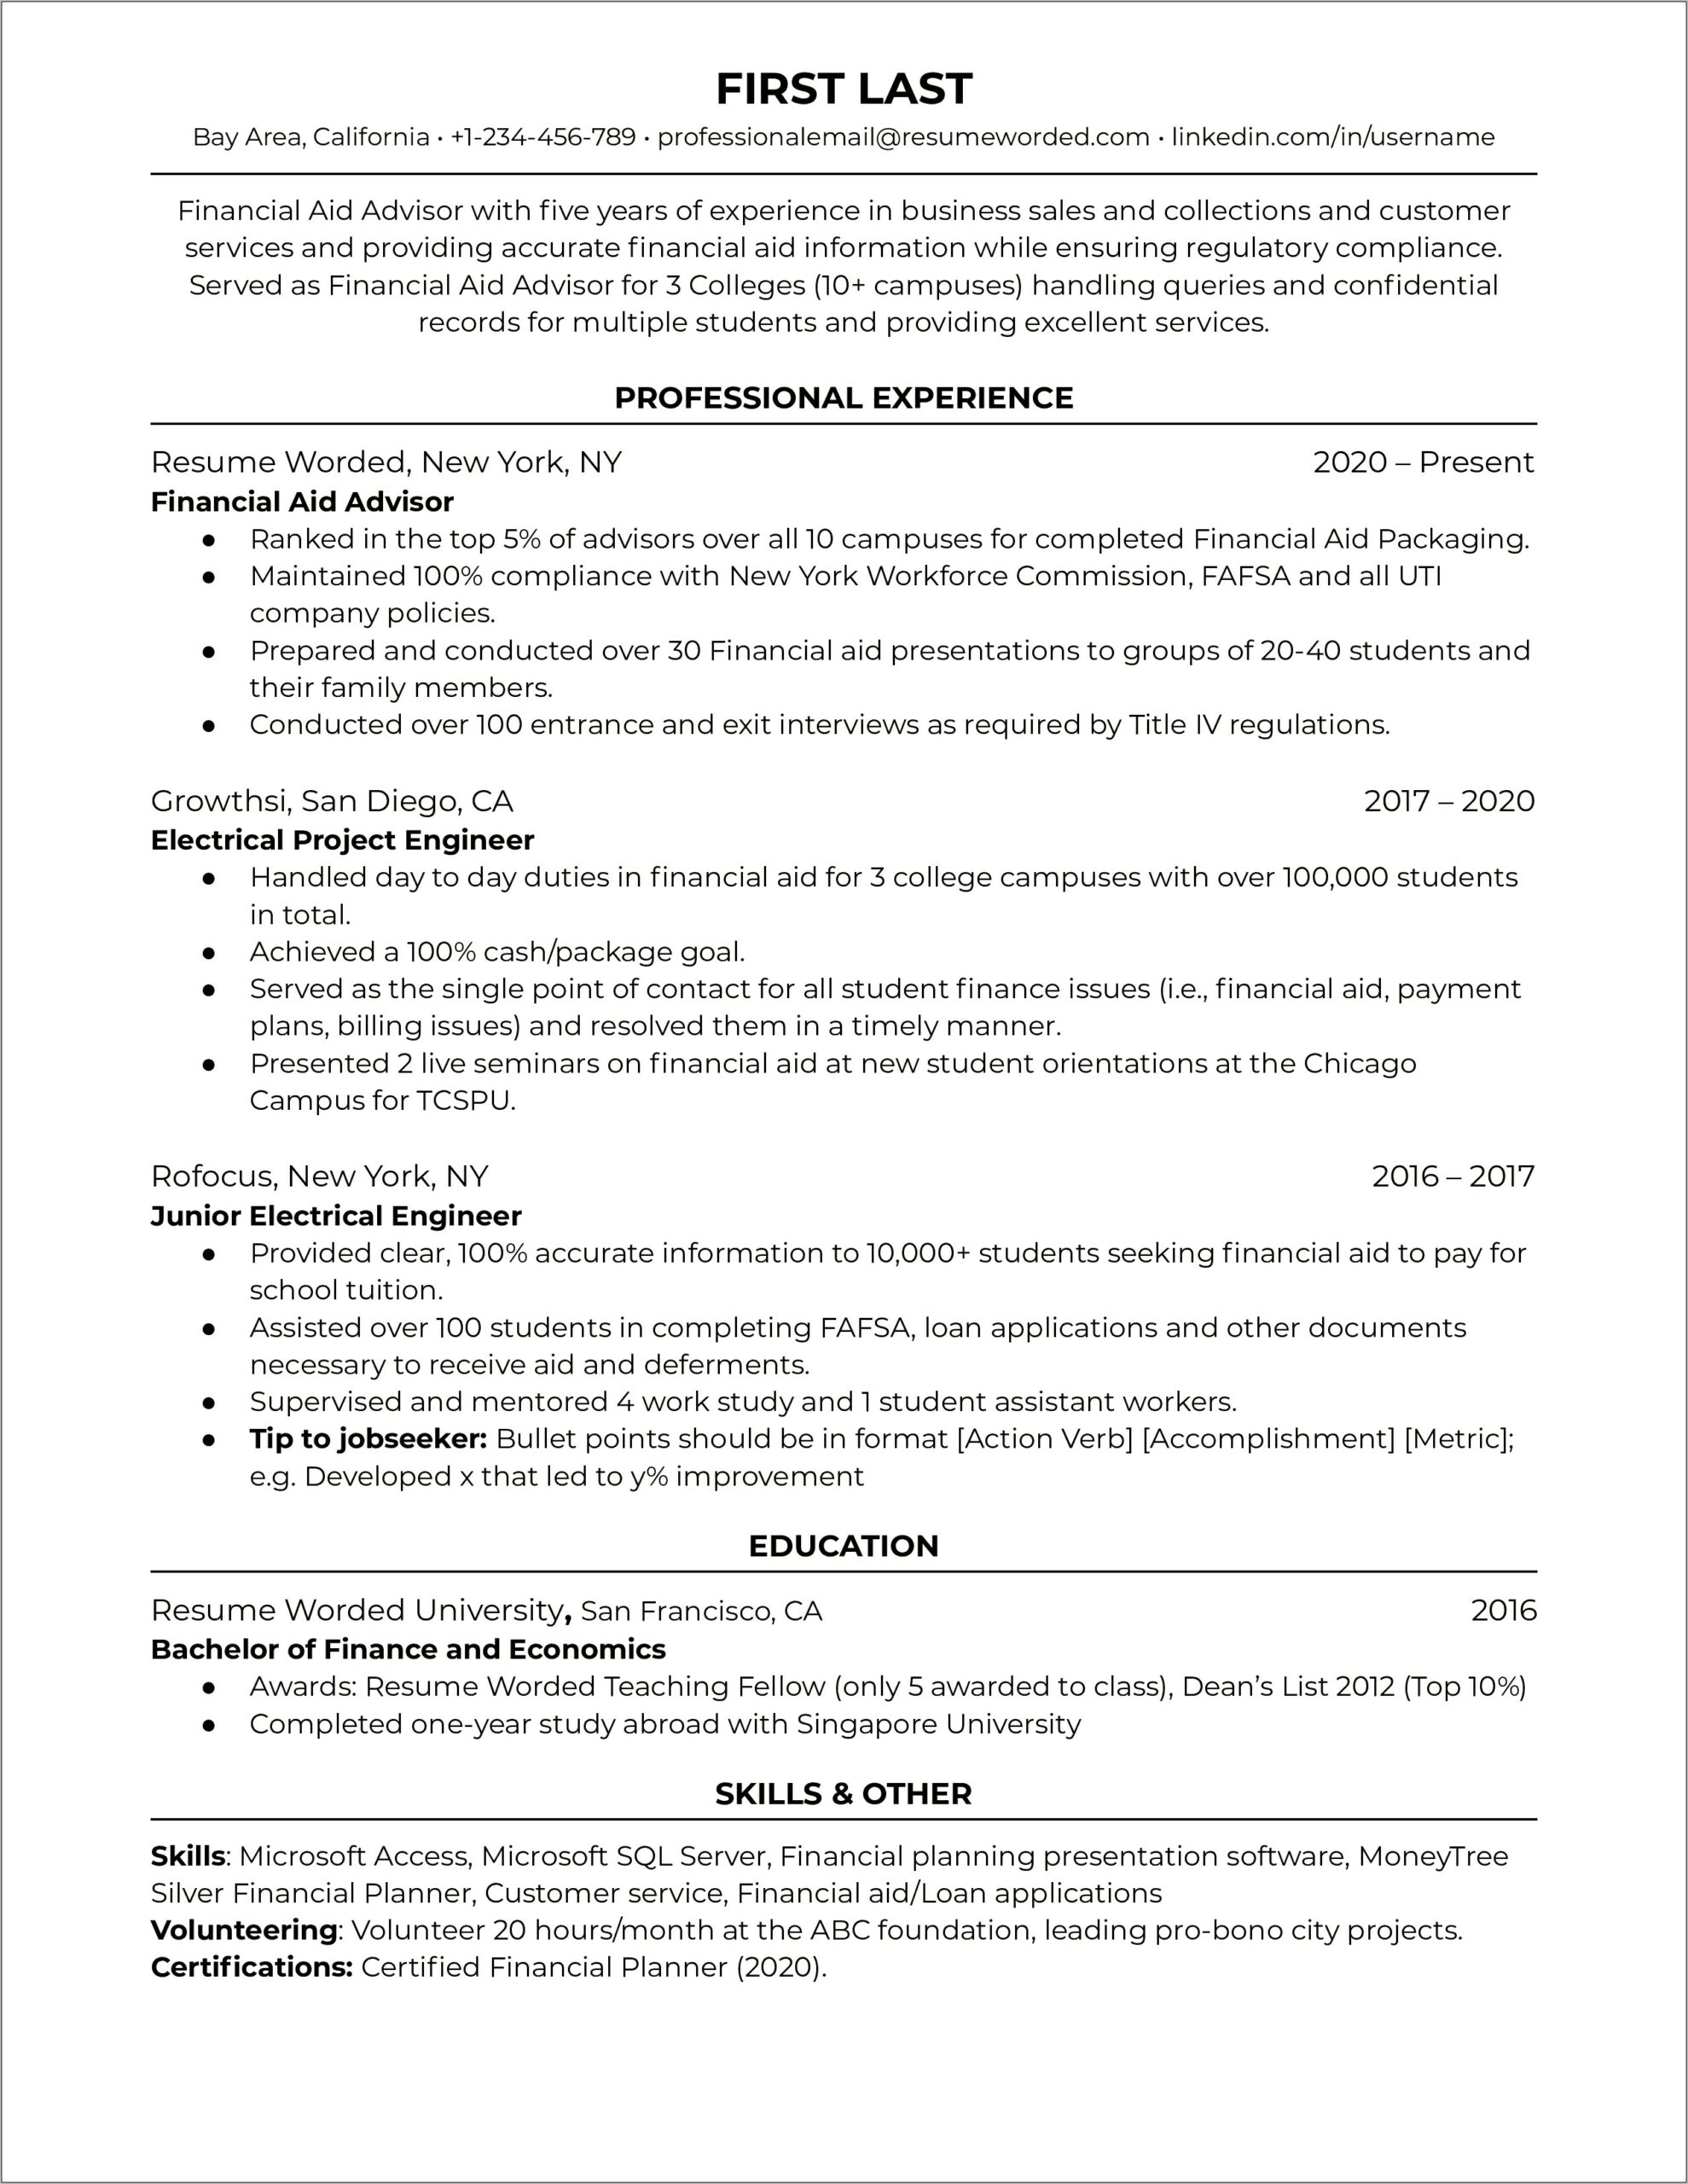 Financial Aid Counselor Job Duties For Resume